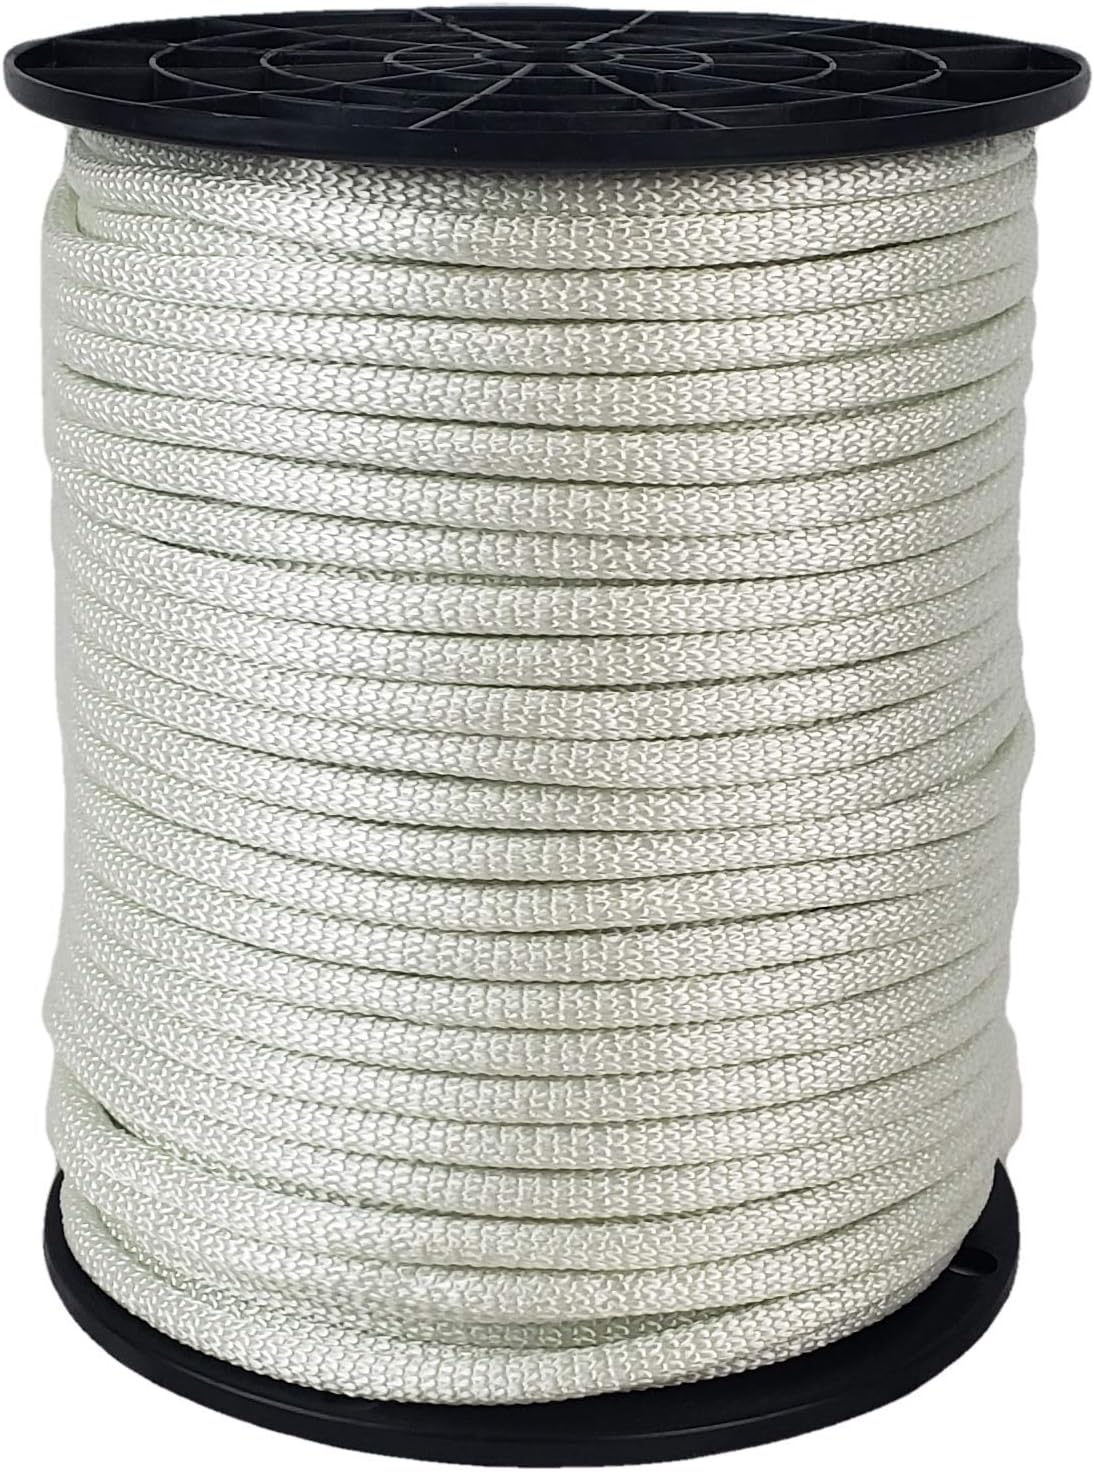 Quality Nylon Rope 1/4 inch Knotrite Nylon Rope - 500 Foot Spool | 100% Nylon - Solid Braid - Dyeable - Industrial Grade - High UV and Abrasion Re